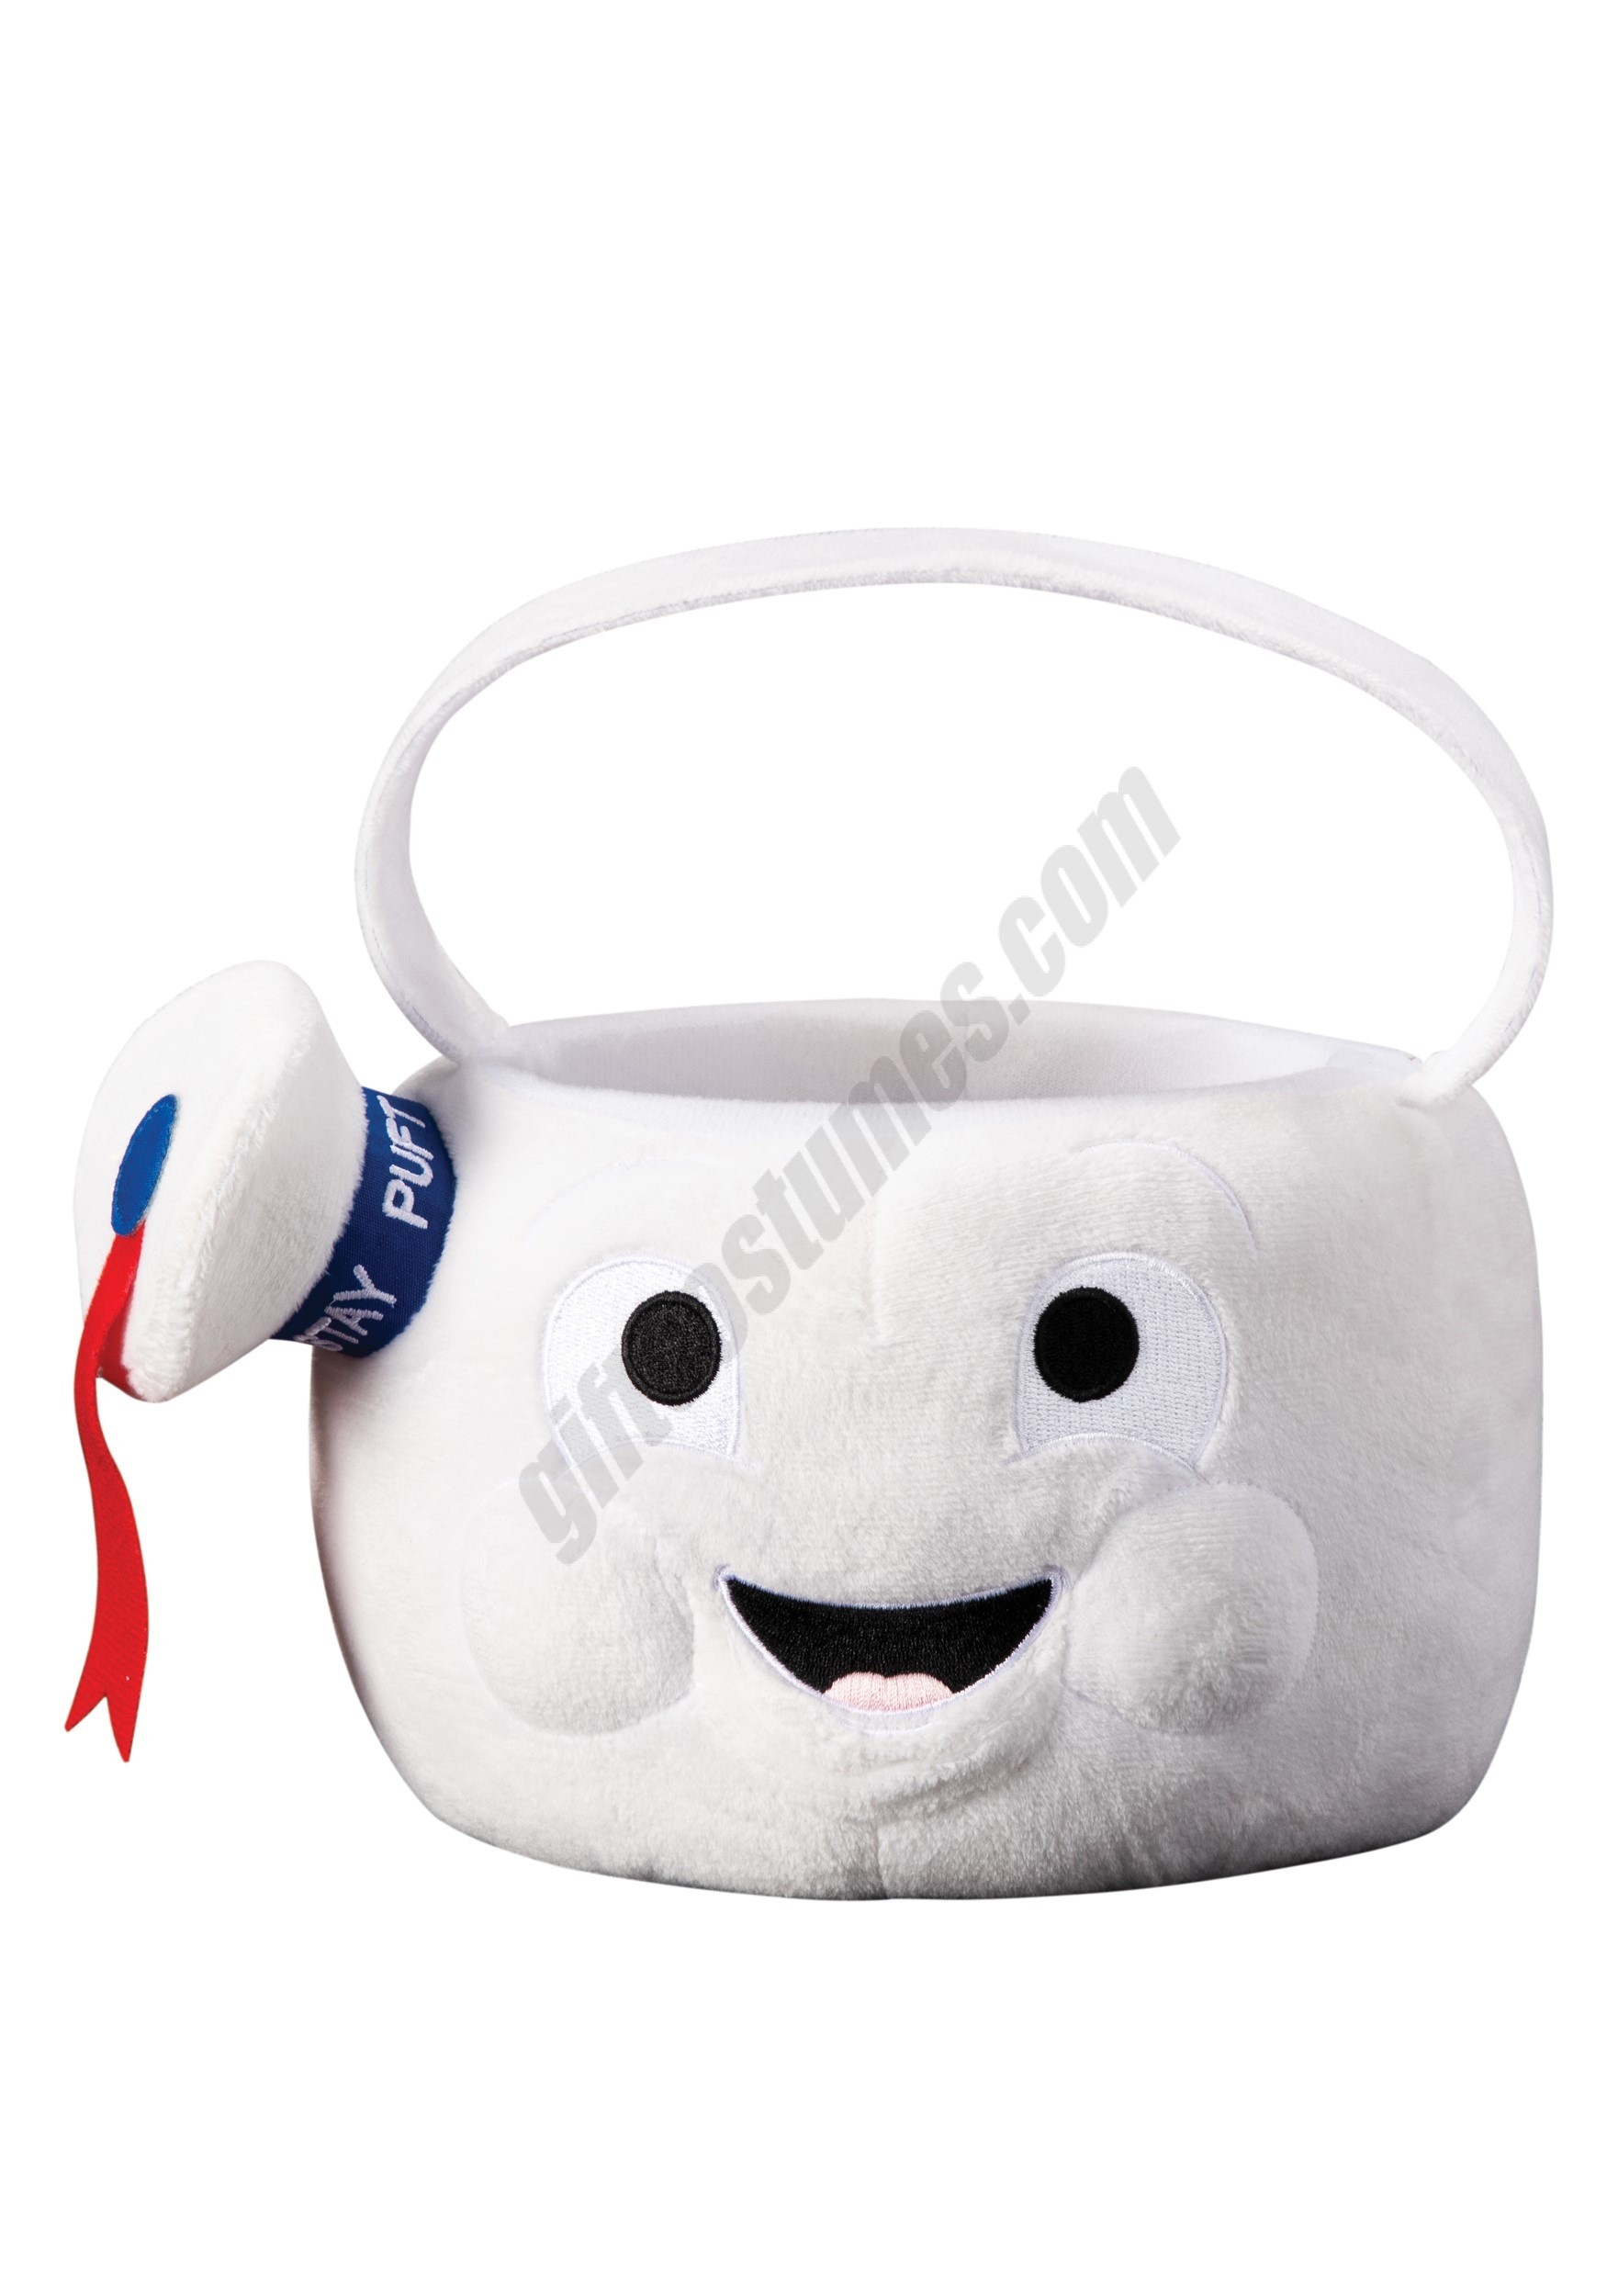 Ghostbusters Stay Puft Marshmallow Treat Tote Promotions - Ghostbusters Stay Puft Marshmallow Treat Tote Promotions